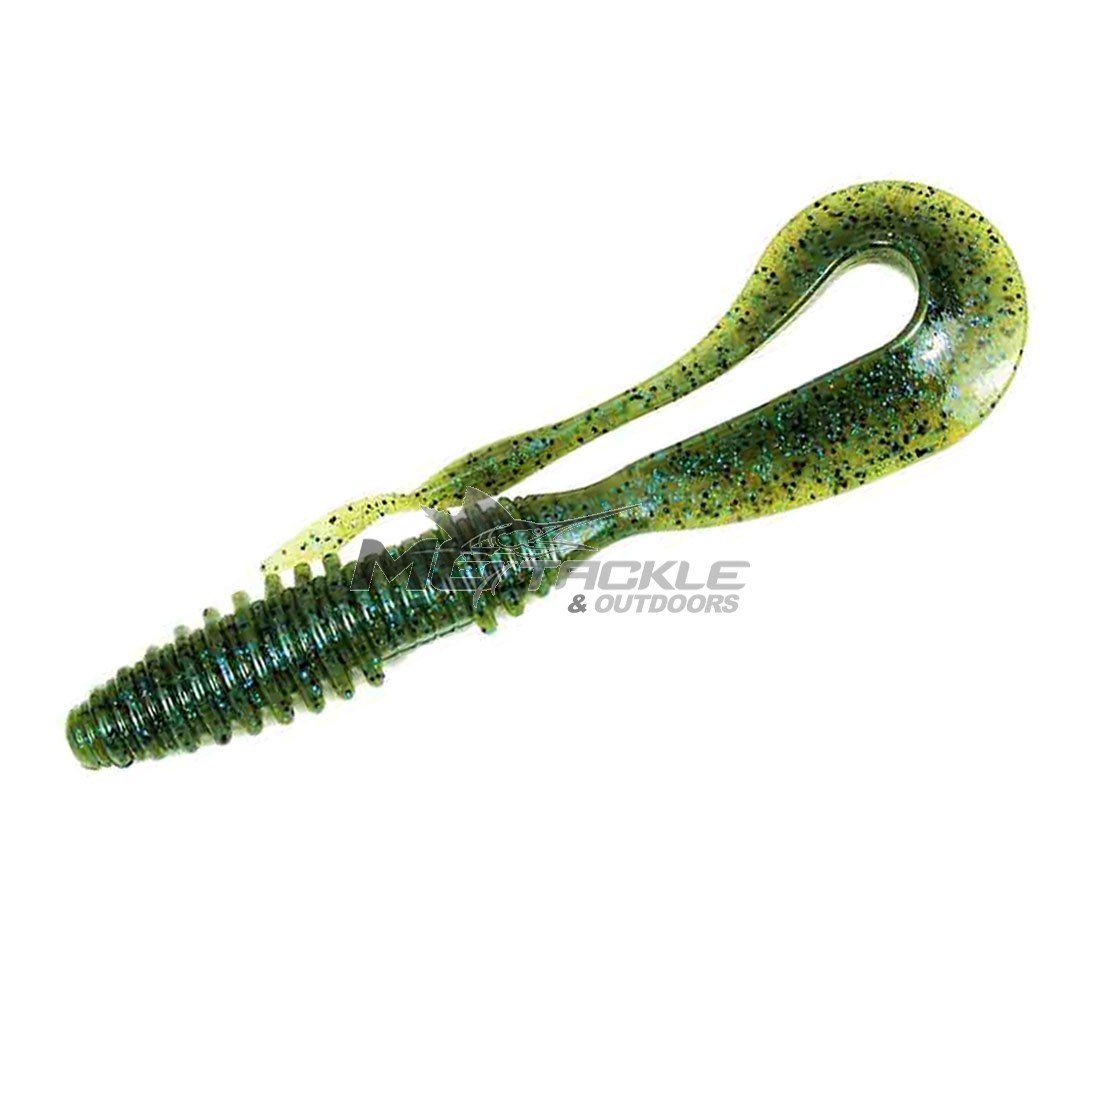 Keitech Mad Wag Motackle And Outdoors 